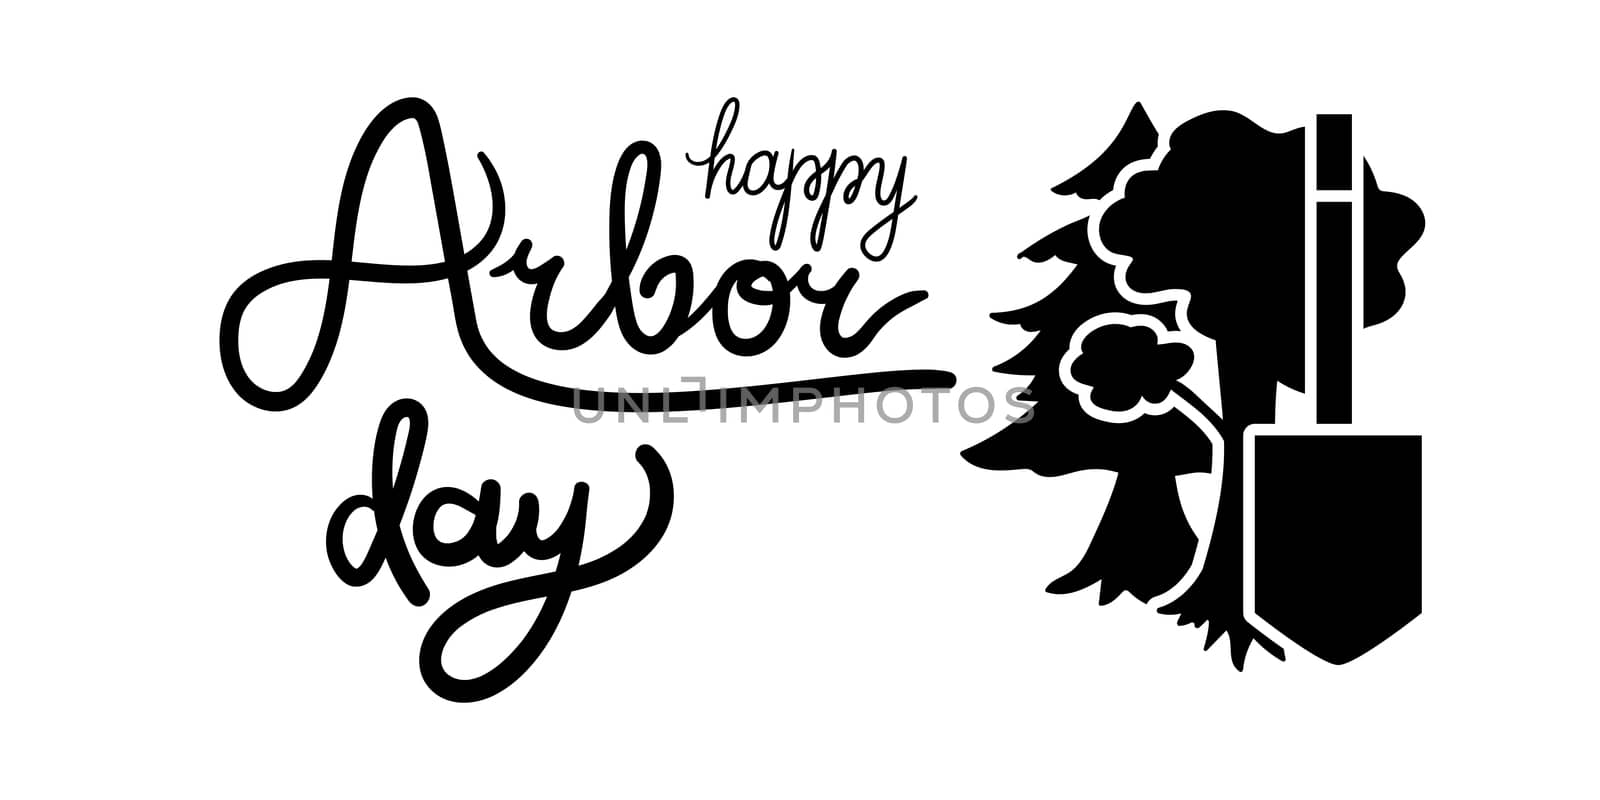 Save Our Planet Concept With Shovel. Arbor Day Greeting for sticker, banner and flyer. Vector